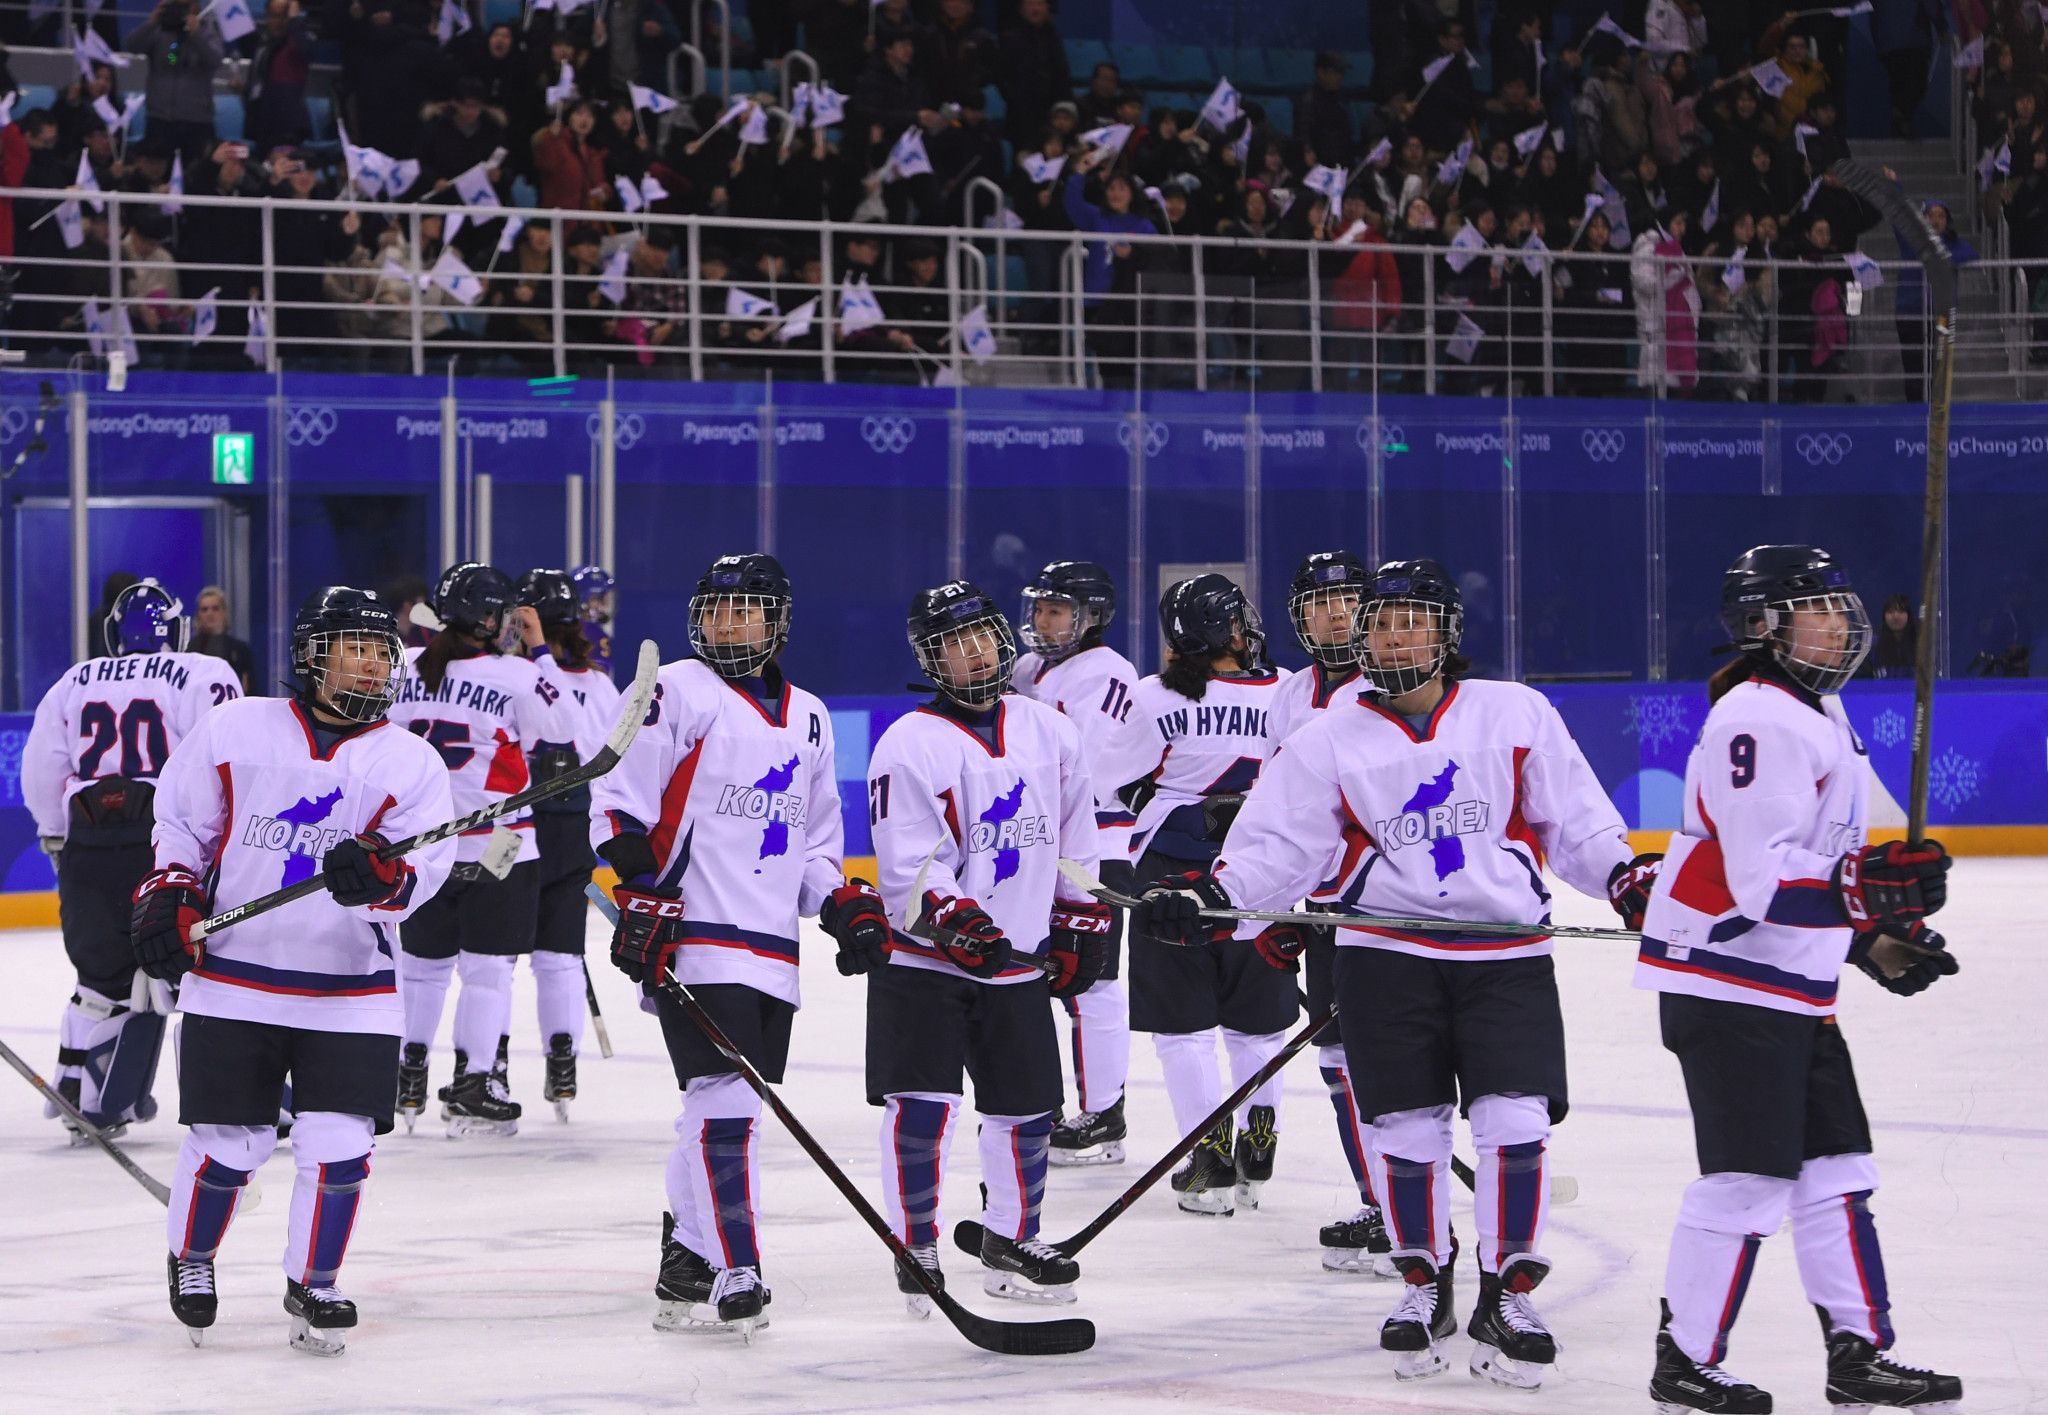 A unified Korean ice hockey women's team featured at Pyeongchang 2018 ©Getty Images